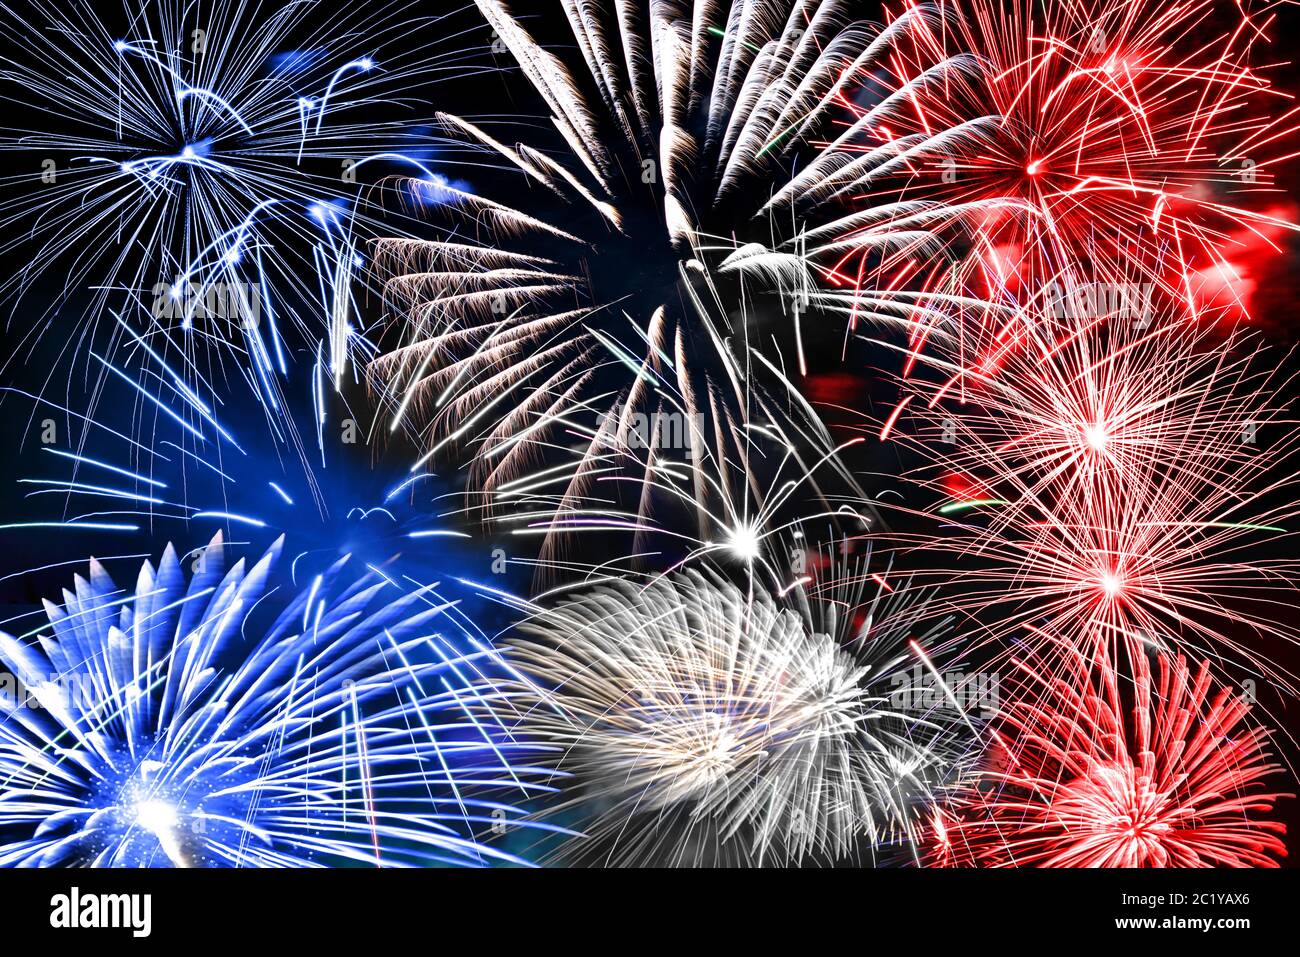 Blue white and red fireworks background Stock Photo